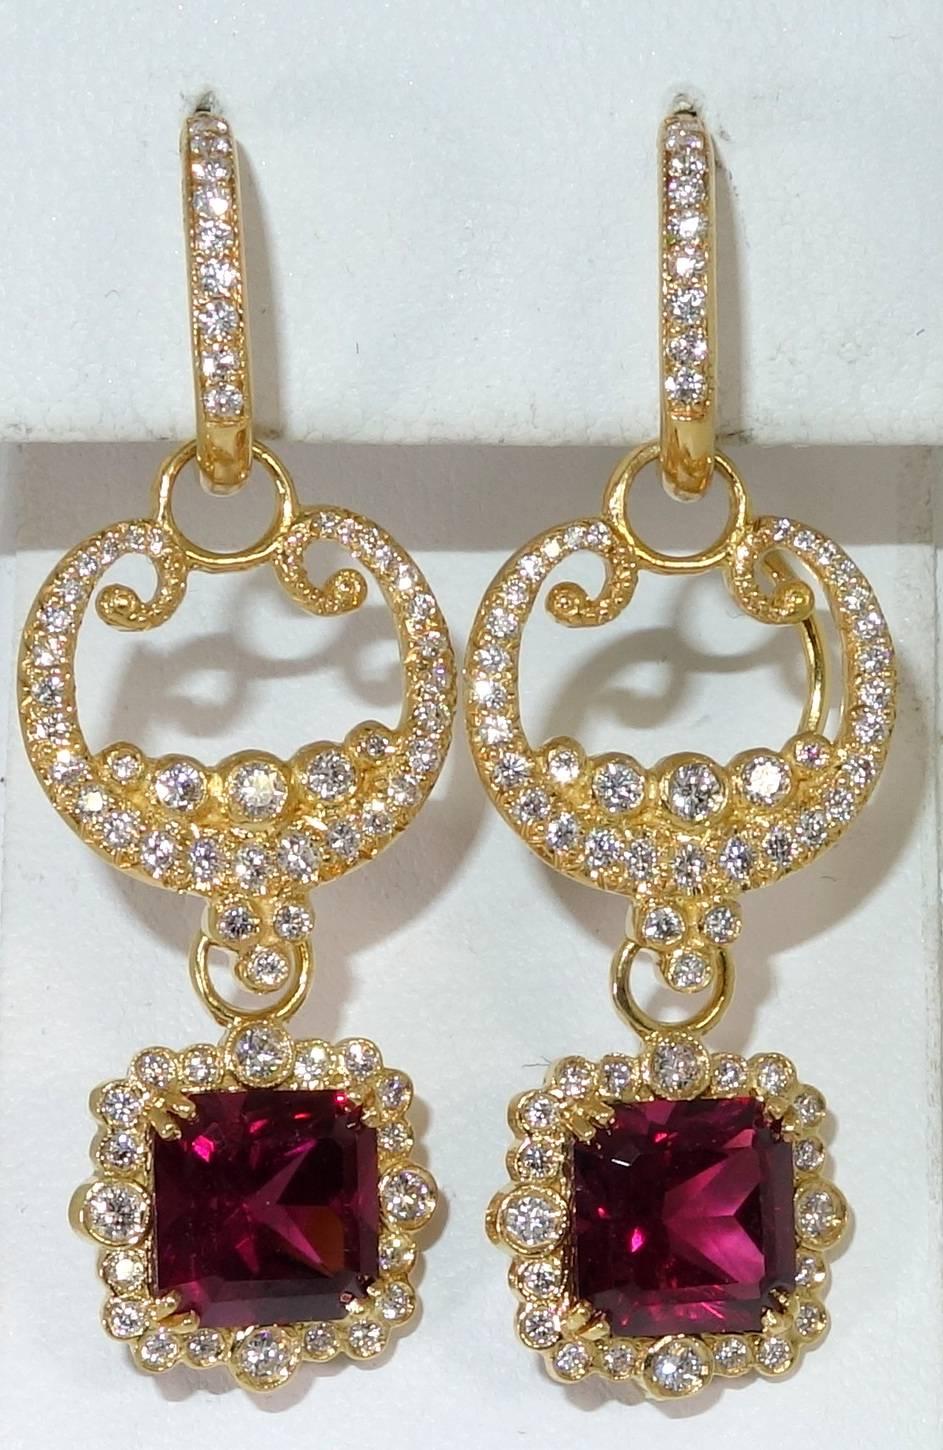 Versatile because they can be worn five different ways.  These earrings are well made, bright and unusual.  The Rhodolite garnets are clean and bright and well matched.  The color is superb.  They weigh totaling approximately 6 cts.  There are 2.15